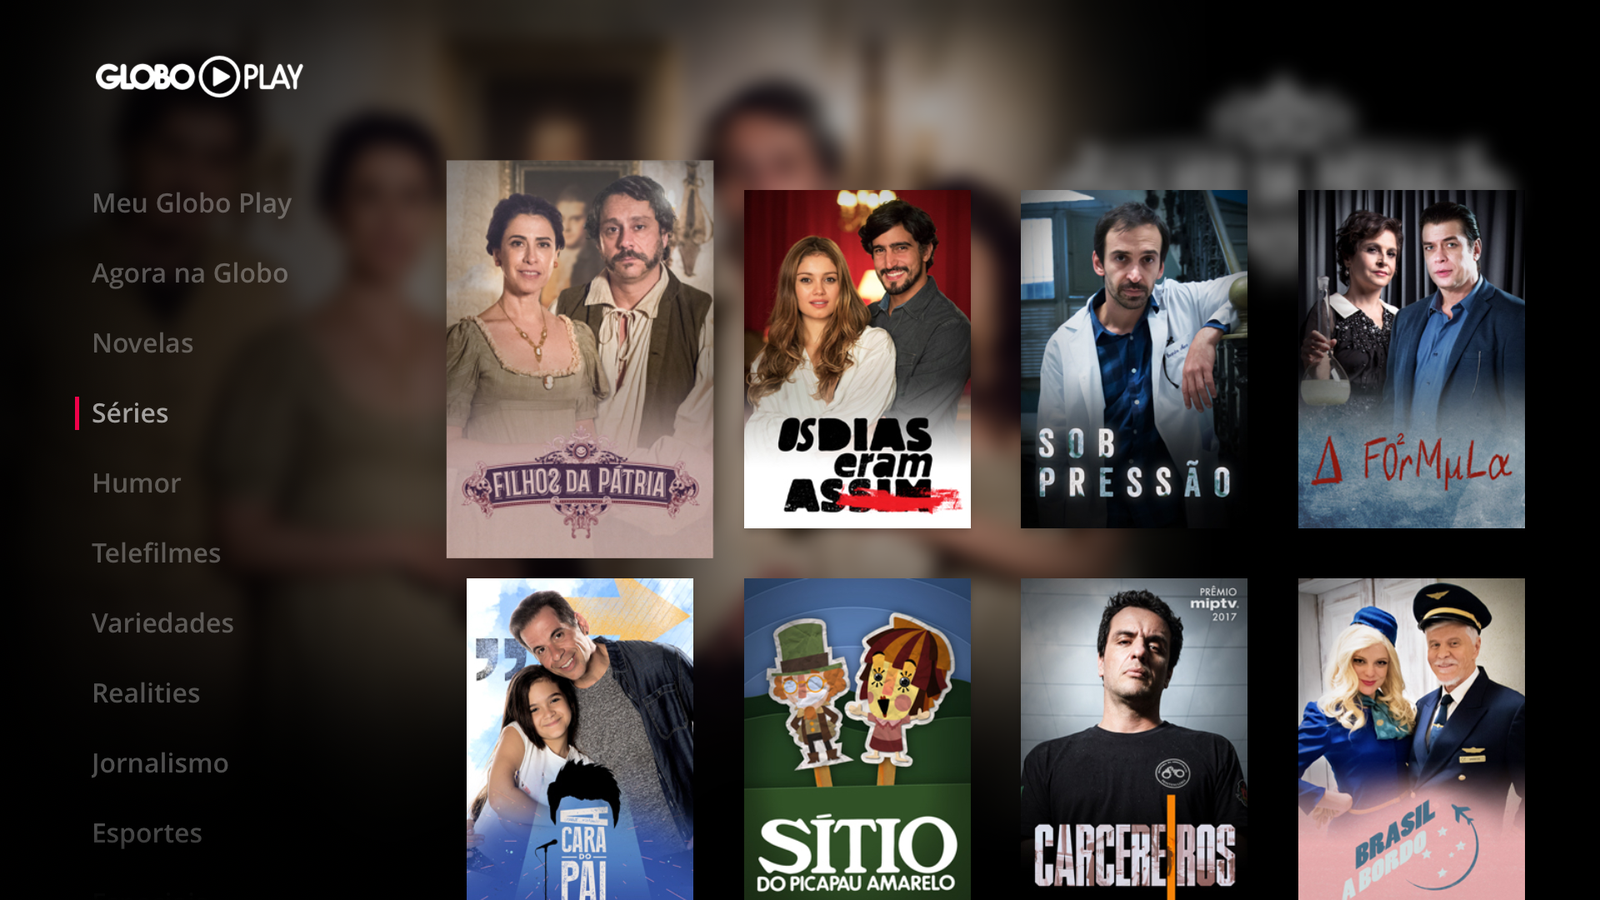 Globo Play app will arrive on Apple TV, already with 4K content and live streams [atualizado: saiu!]